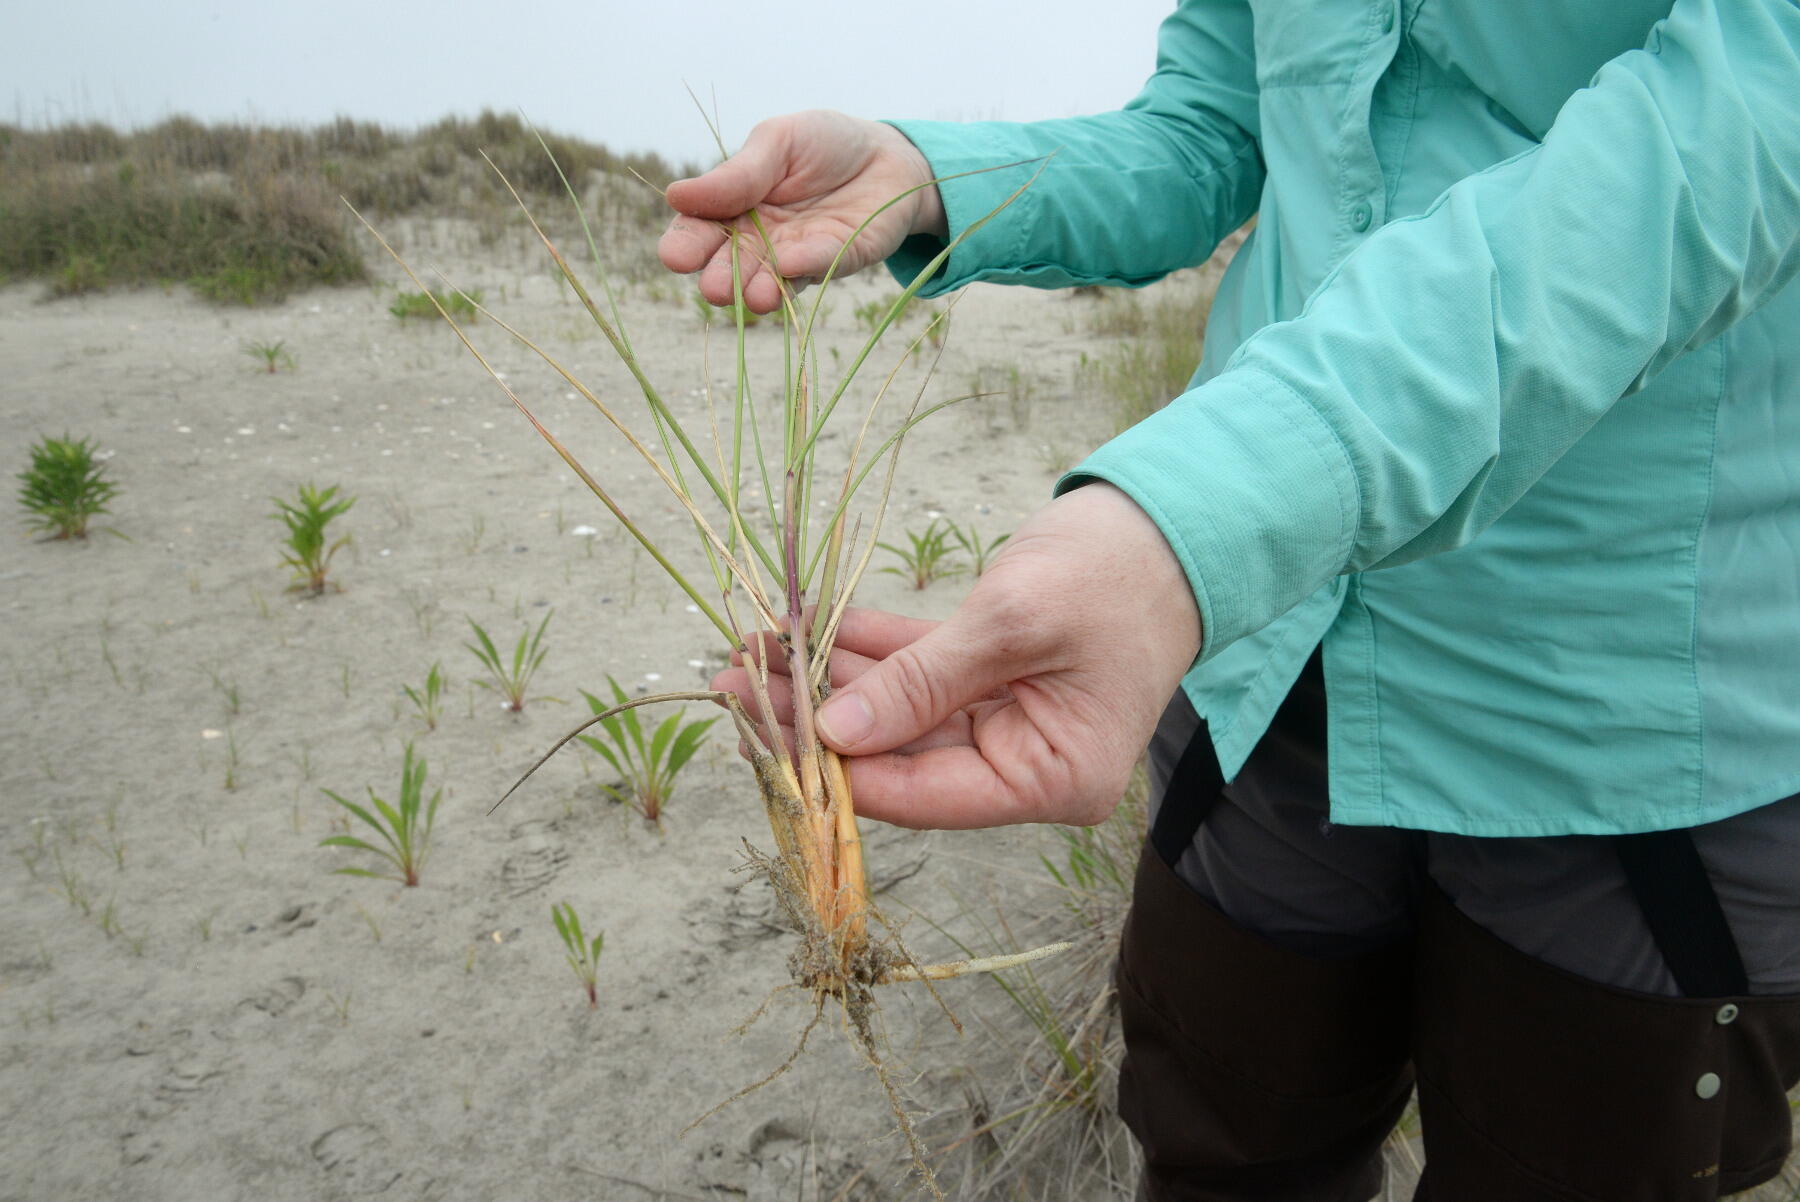 Julie Zinnert, Ph.D., director of the Coastal Plant Ecology Lab, displays a sample of Ammophila, a beach grass that builds dunes that protect islands such as Virginia's barrier islands. The grass is being pushed out as a species of shrub is now spreading year-round instead of dying out, thanks to climate change. (Photo by Brian McNeill, University Relations)